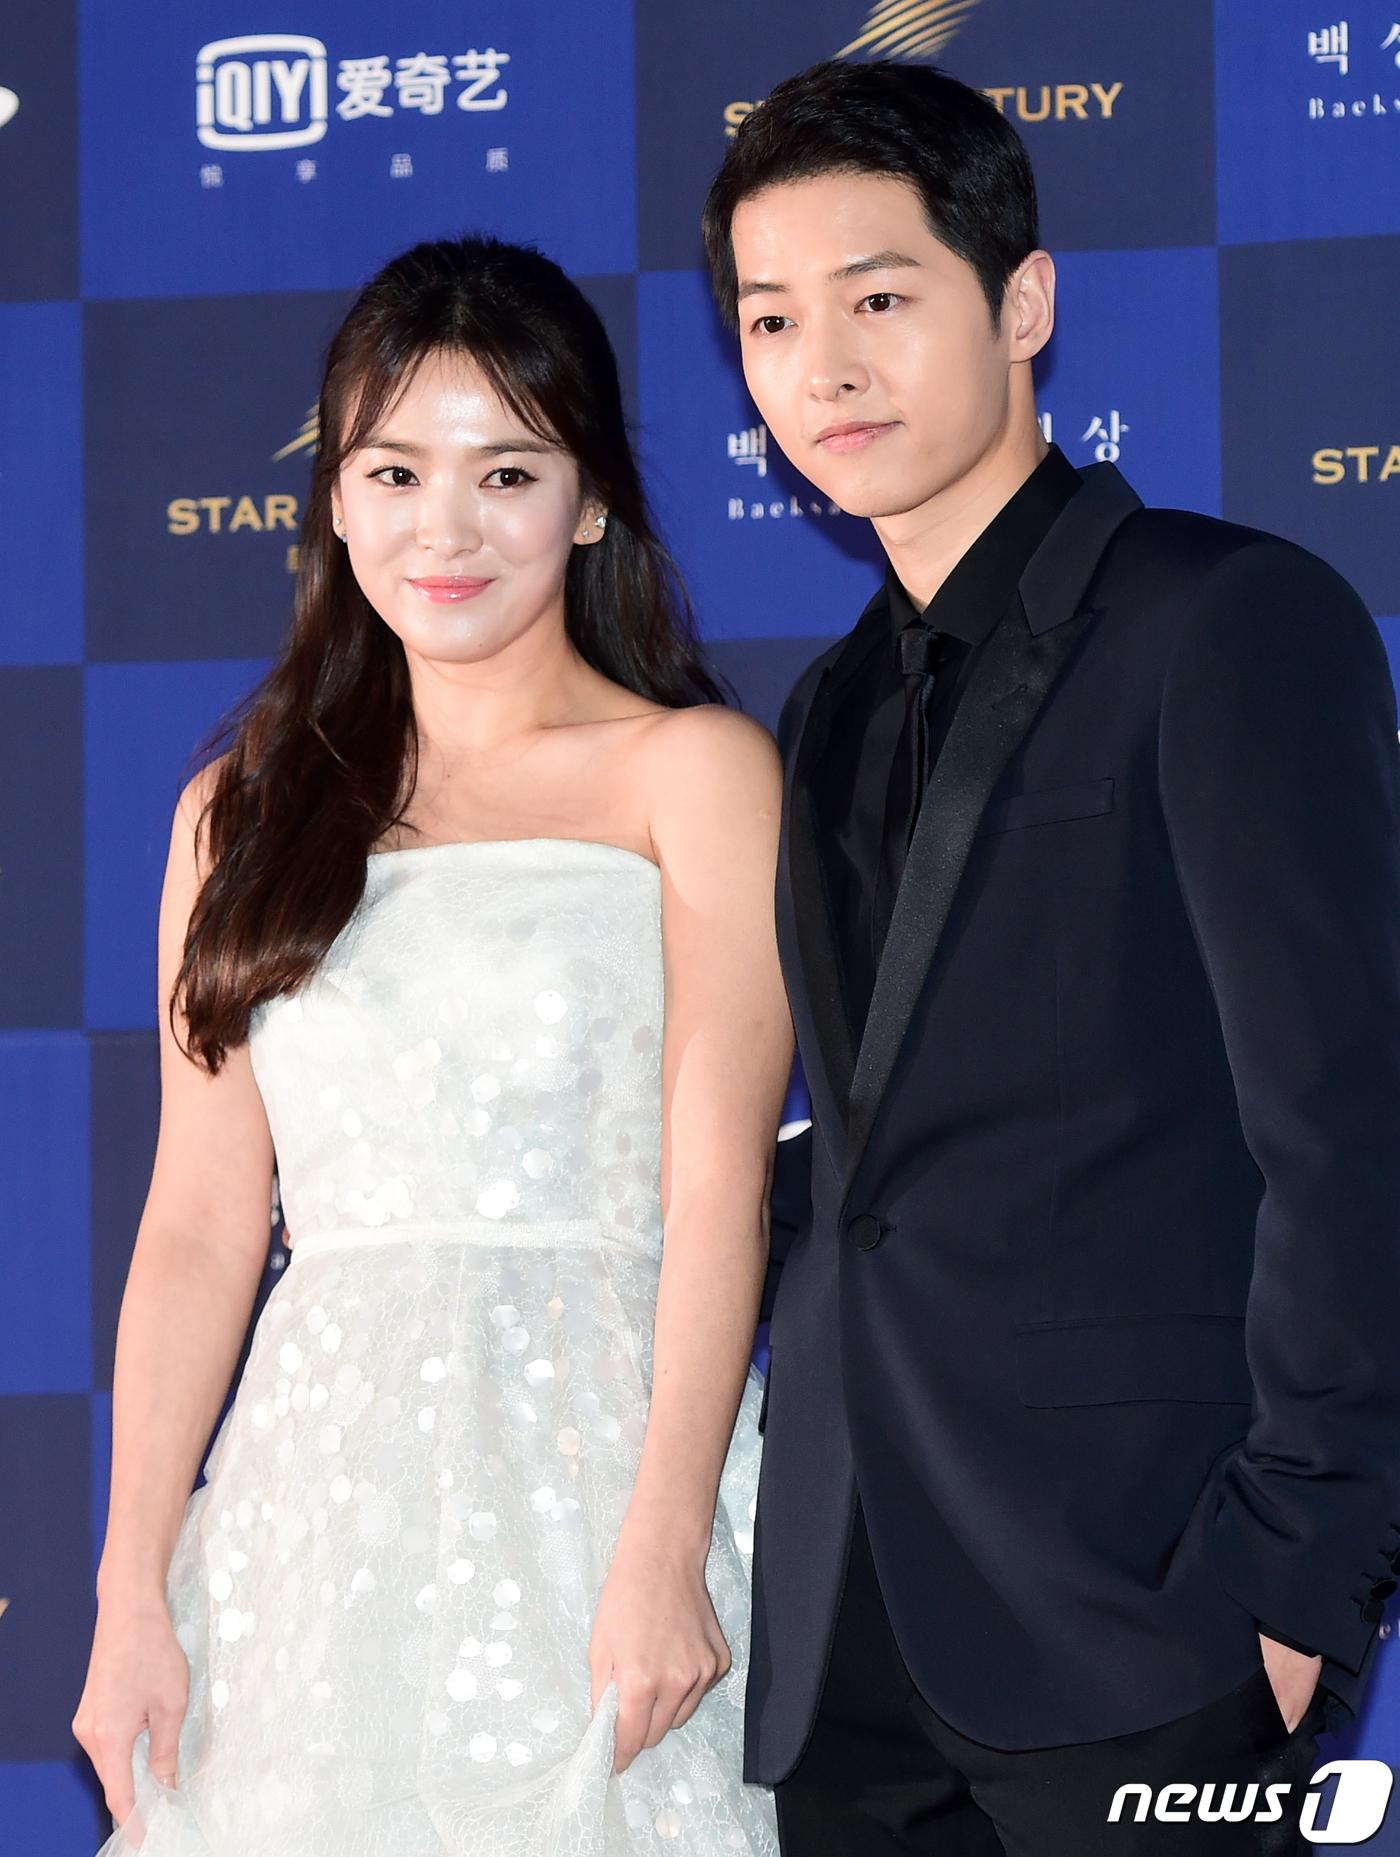 Seoul = = The divorce settlement of Song Song Couple Actor Song Joong-ki (34) and Song Hye-kyo (38) was established.According to the court on the 22nd, the mediation between the two sides was established at the mediation date held by the 12th independent housekeeping department (chief judge Jang Jin-young) of the Seoul Central District Court at 10 a.m. on the same day.According to Song Hye-kyo, the two sides concluded the mediation process by divorceing each other without alimony or property division.Now, if the two sides receive a mediation report and report a divorce to the ward office within one month, the divorce process will be finalized.Song Hye-kyos agency UAA said it is also in the process of divorce mediation, saying, The reason is that the two sides can not overcome the difference between the two sides.Meanwhile, Song Joong-ki and Song Hye-kyo met as actors starring KBS 2TV drama Dawn of the Sun which was broadcast in 2016 and developed into lovers.Two rumors of devotion were raised, but all denied, and the marriage was officially announced in two weeks after the second episode.Since then, the pair have had a grand wedding in October 2017 amid the blessings of fans and colleagues.Star couple drove a big topic at home and abroad, but after a year and nine months of marriage, it was a great shock to the public.Song Joong-ki has left the part 3 broadcast of Season 1 after finishing the TVN drama Asdal Chronicle.He is also working on his acting career by confirming his appearance in the movie Win Ri Ho. Song Hye-kyo is also considering his next film.